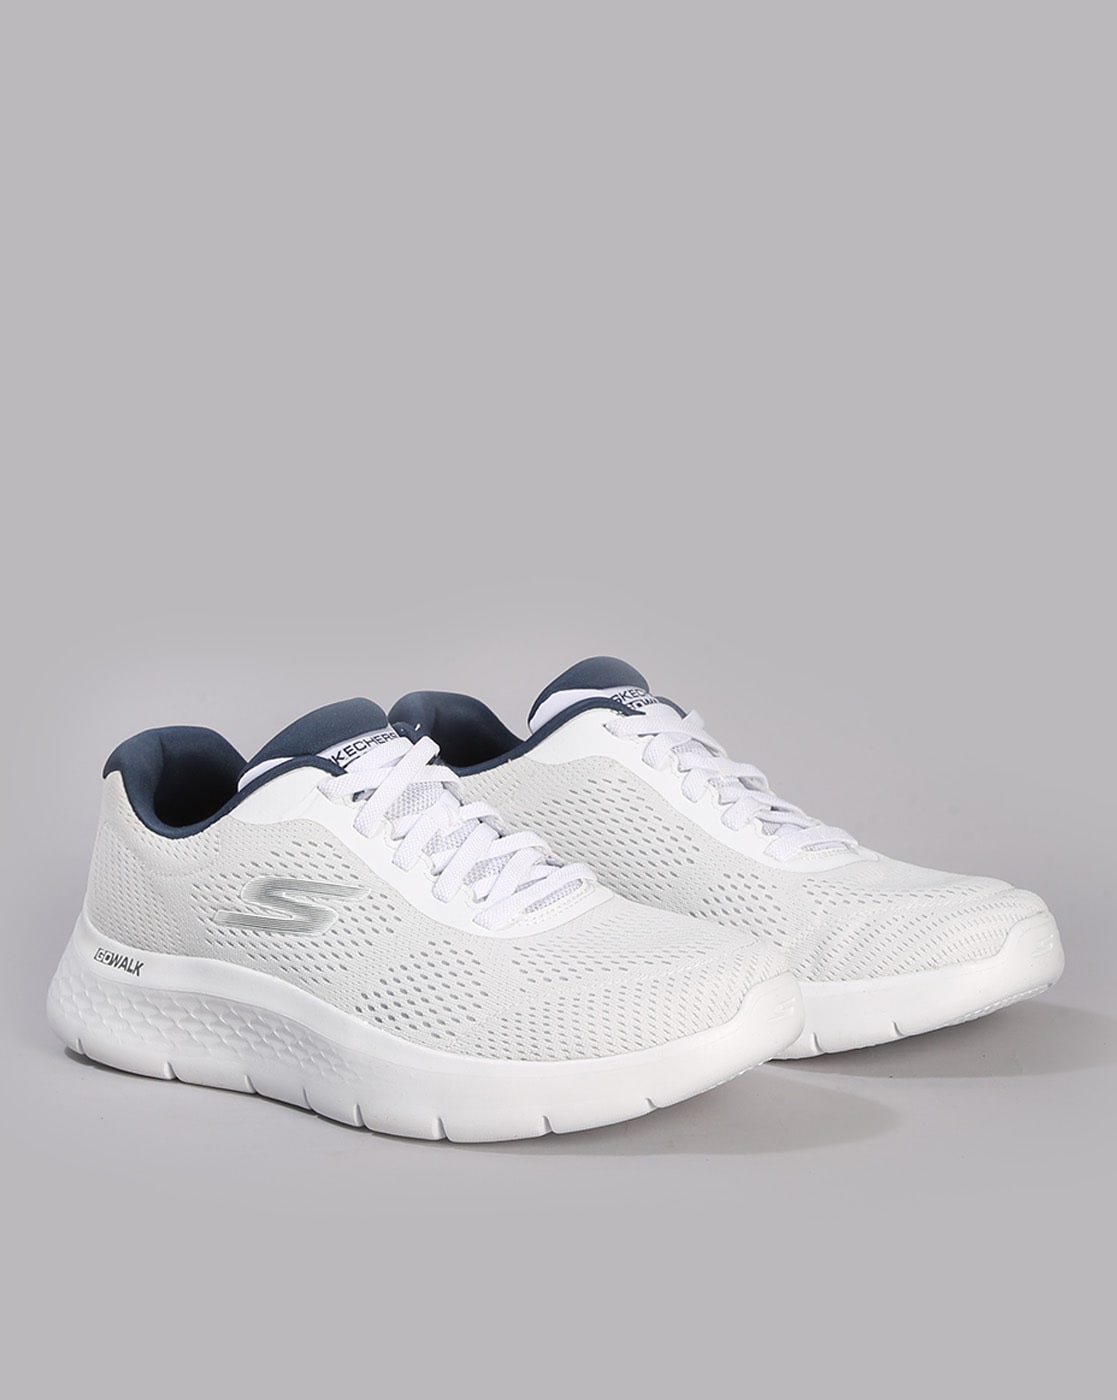 Casual Shoes for Men by Skechers | Ajio.com